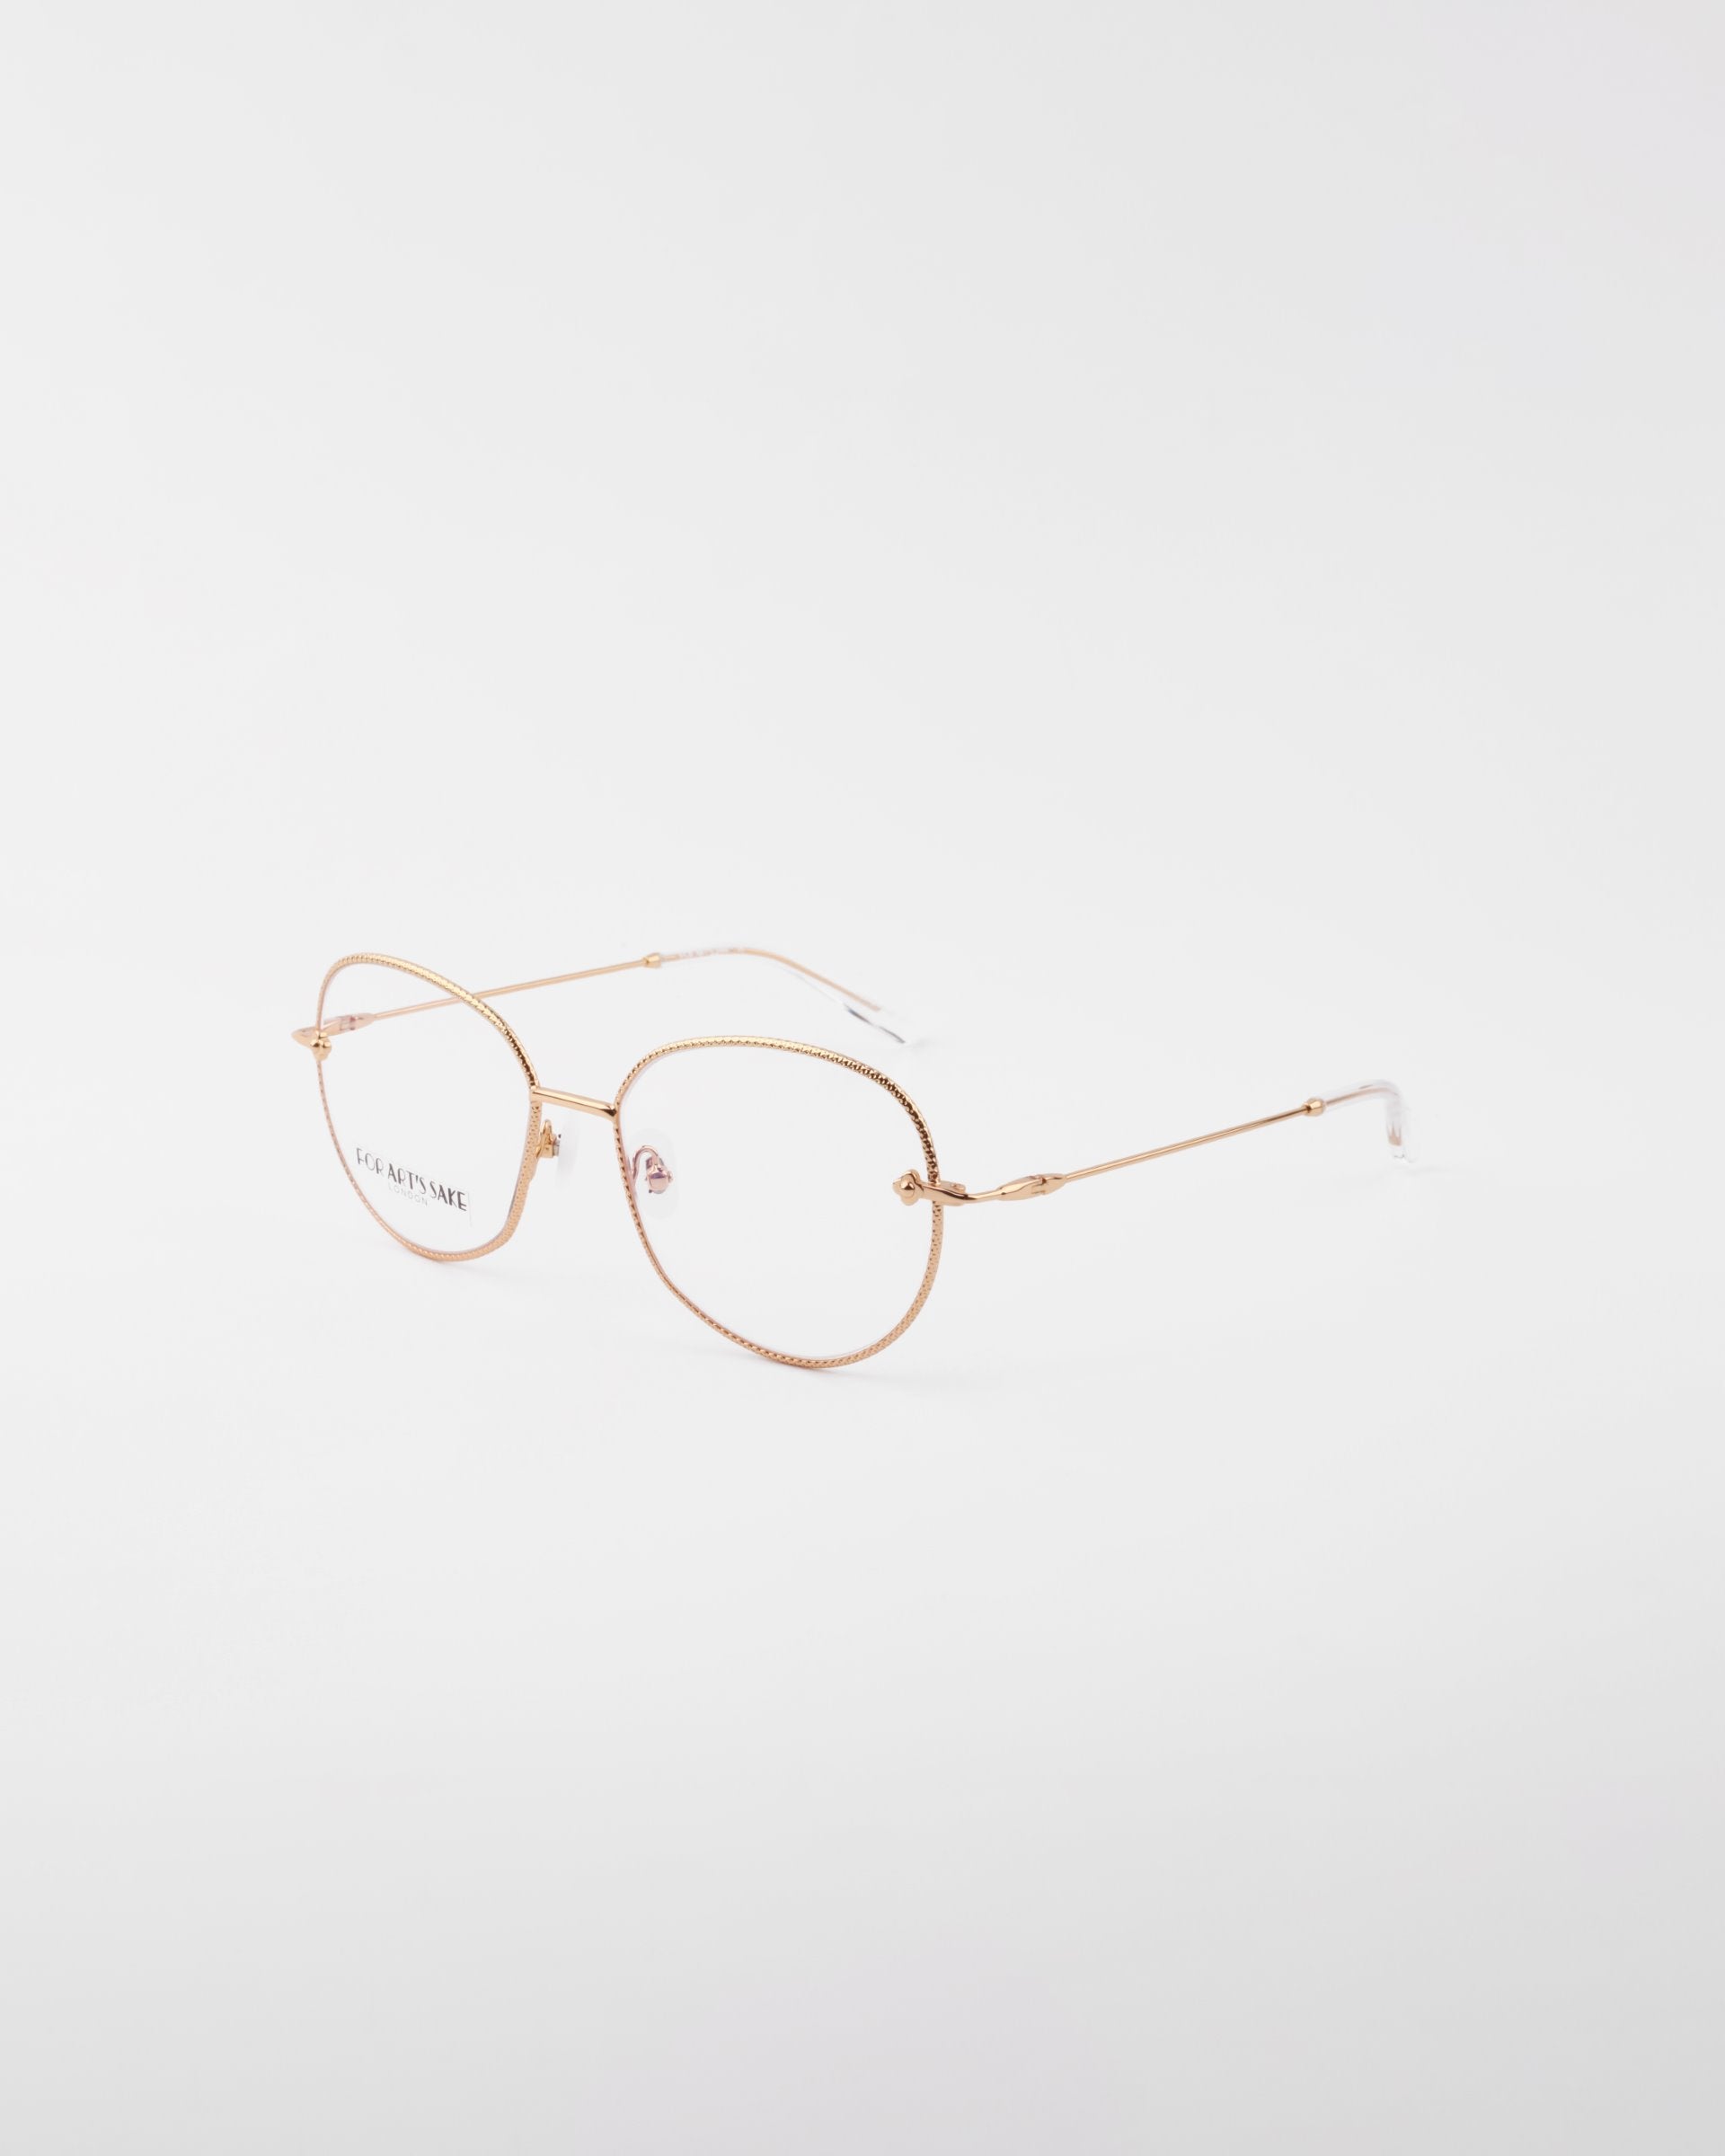 A pair of gold-framed, round eyeglasses with clear lenses is set against a plain white background. The delicate, handmade Jasmine eyewear by For Art&#39;s Sake® features thin temples with a subtle texture, and the nose pads are transparent. The frame is crafted from gold-plated stainless steel for added elegance and durability.